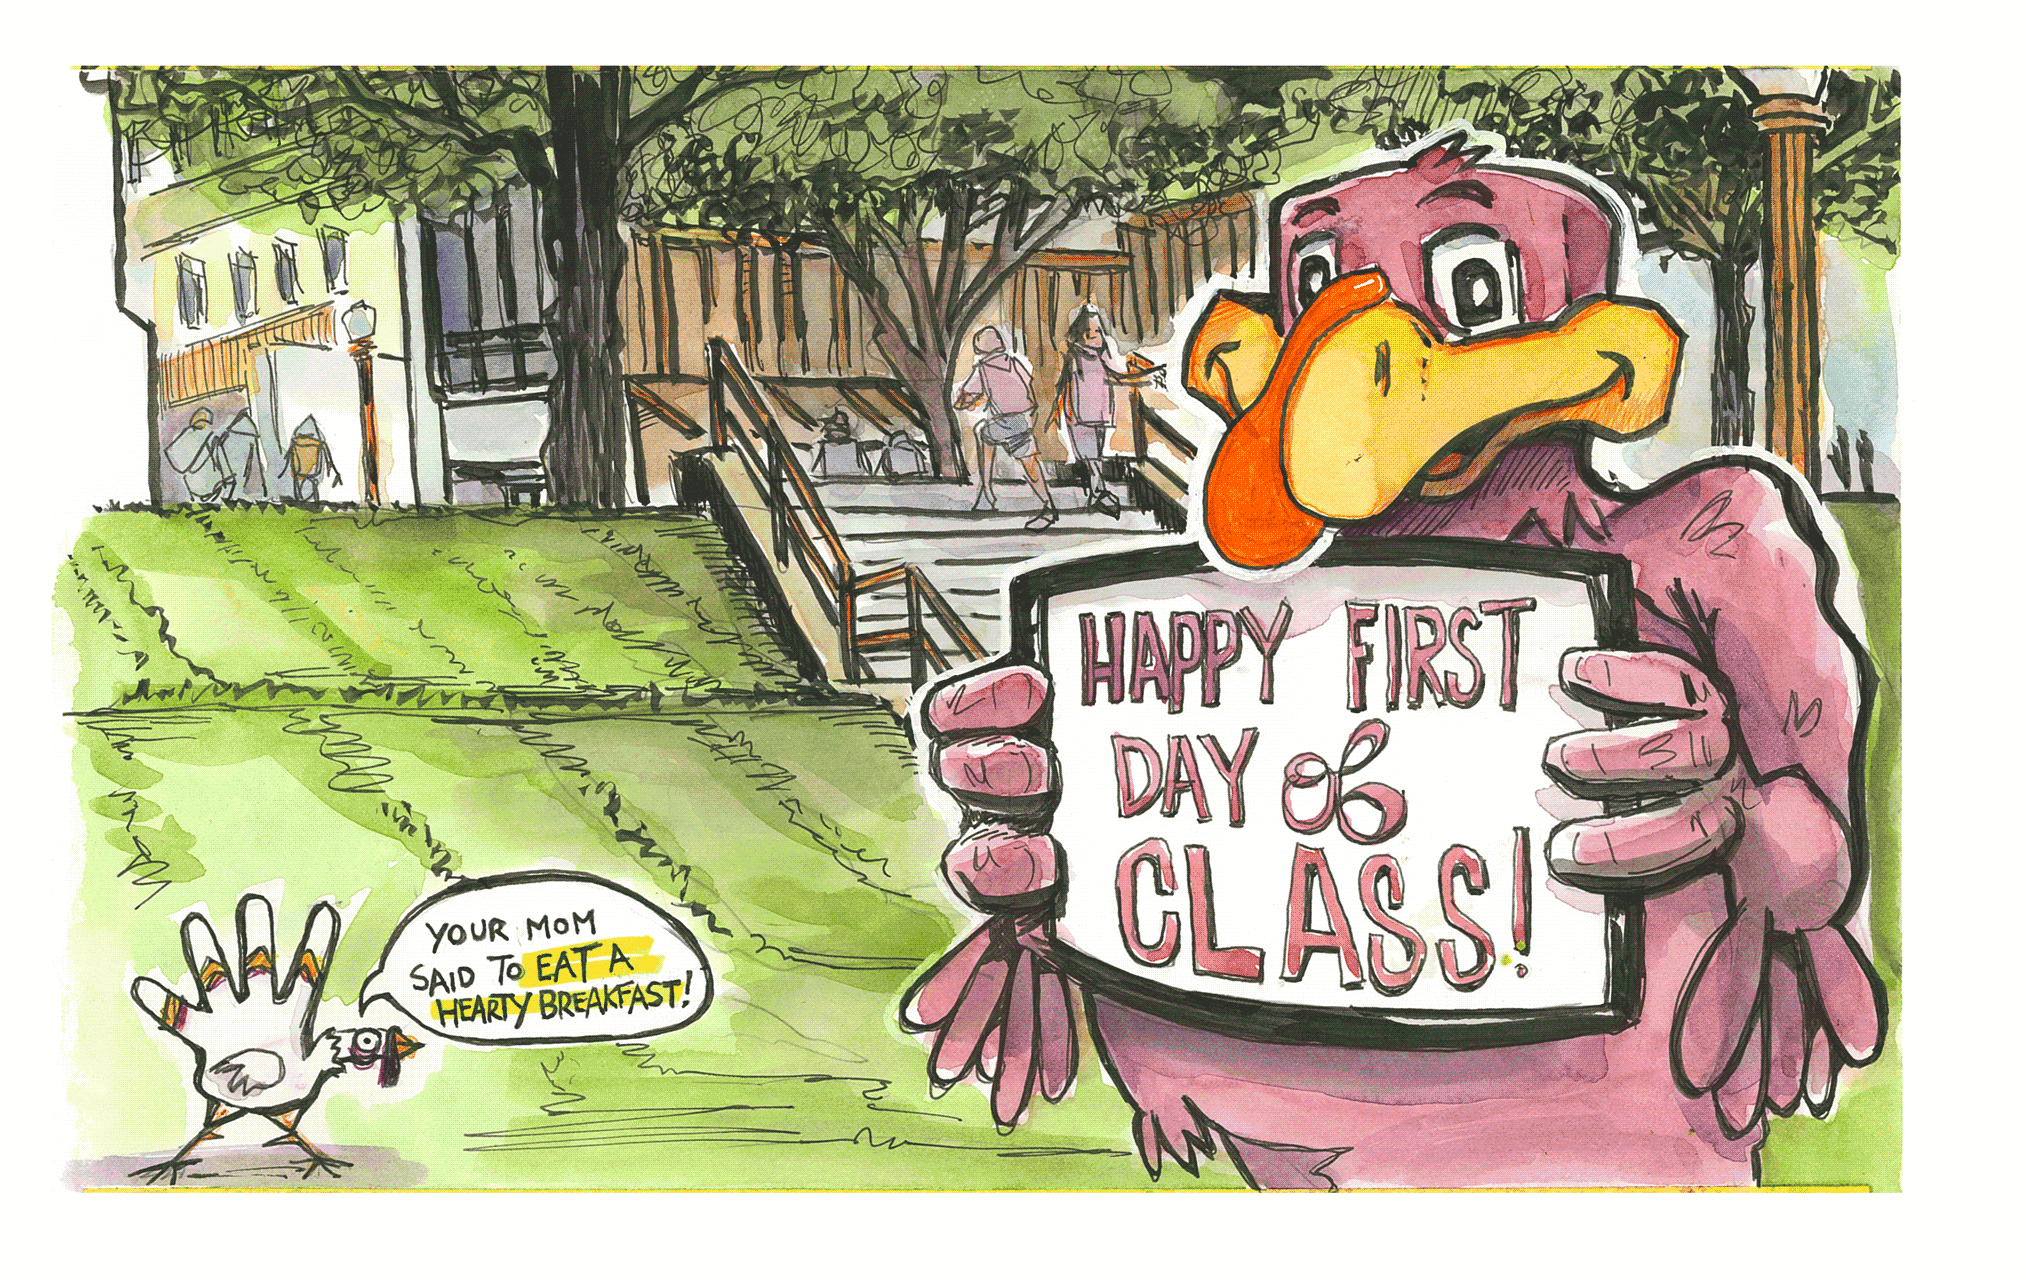 Animated ink and watercolor sketch of the HokieBird with a sign wishing students a happy first day of class!